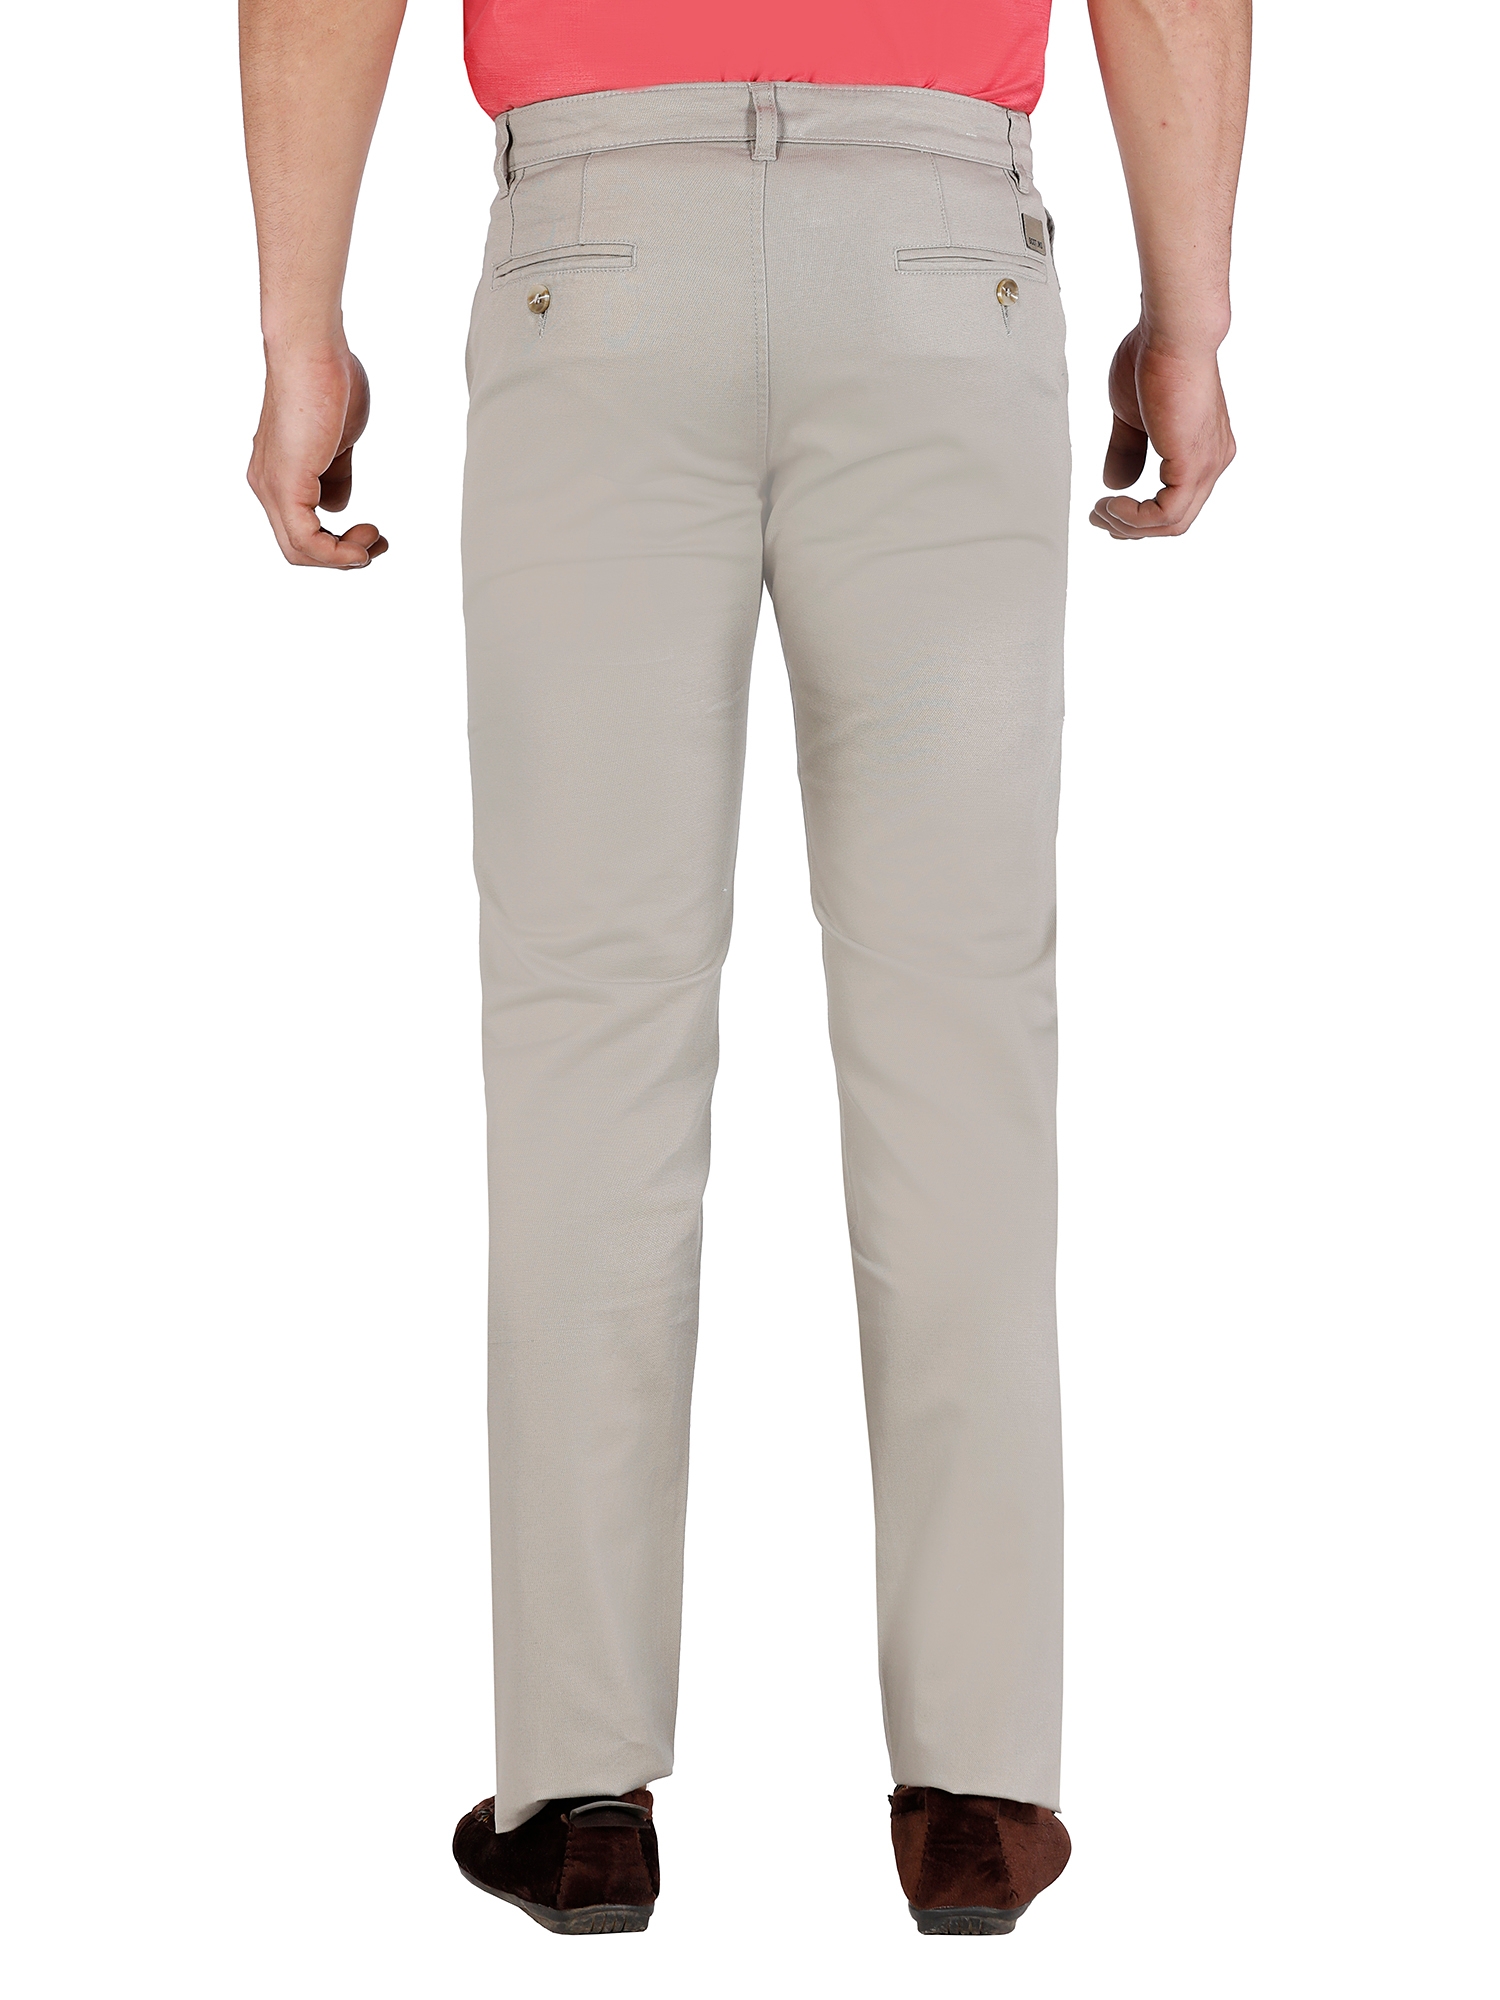 D'cot by Donear | D'cot by Donear Men Brown Cotton Relaxed Solid Casual Trouser